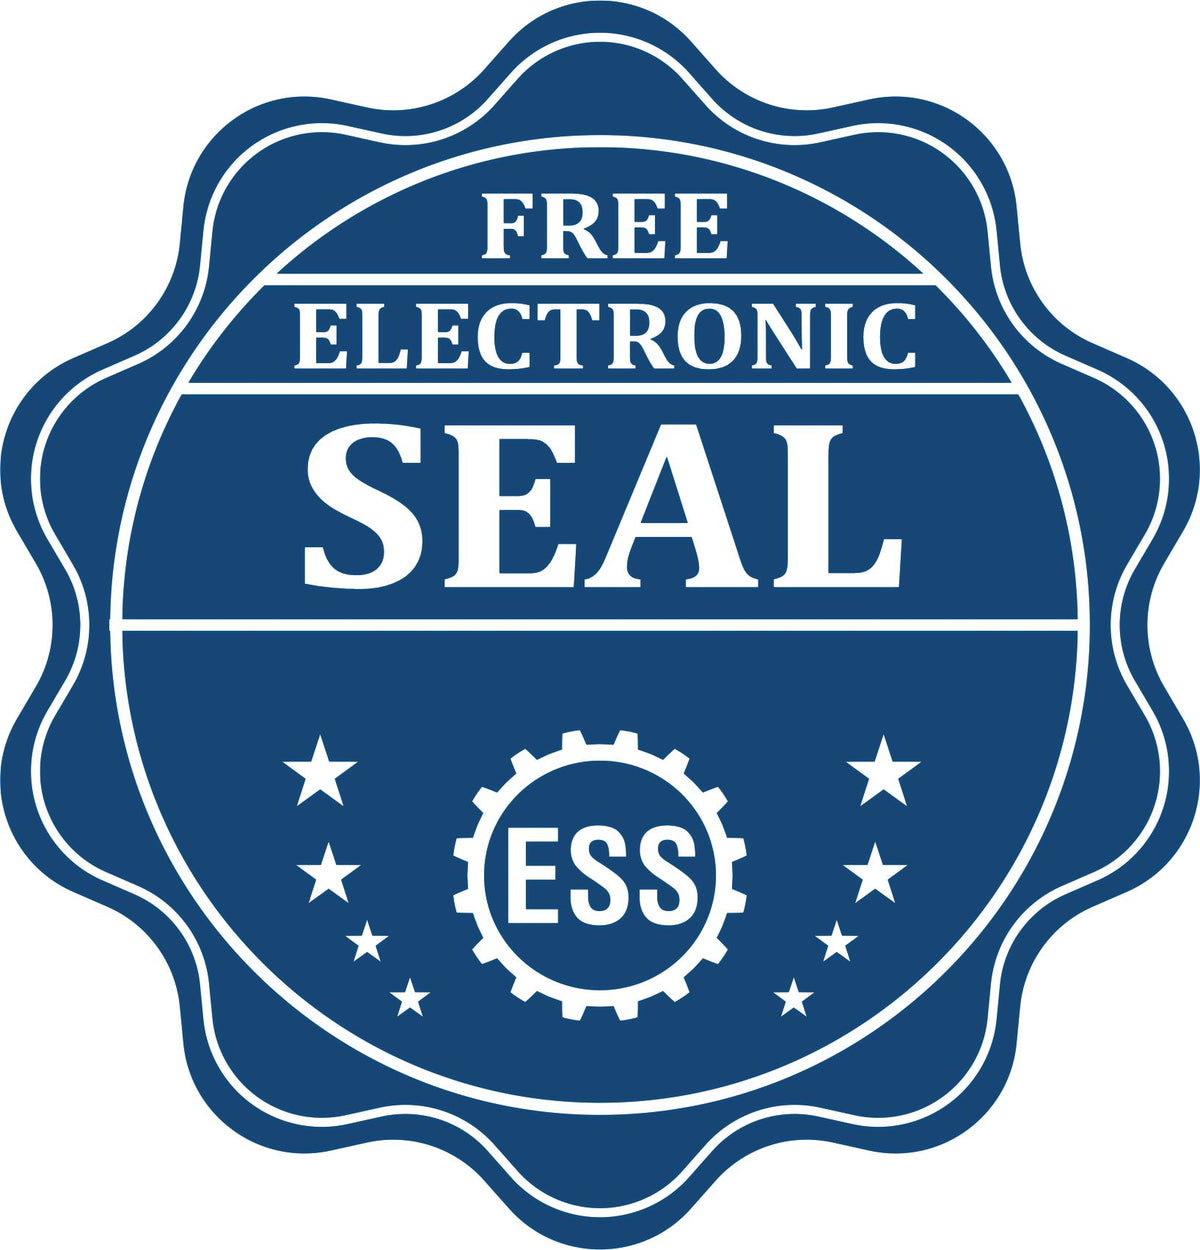 A badge showing a free electronic seal for the Hybrid New Hampshire Geologist Seal with stars and the ESS gear on the emblem.